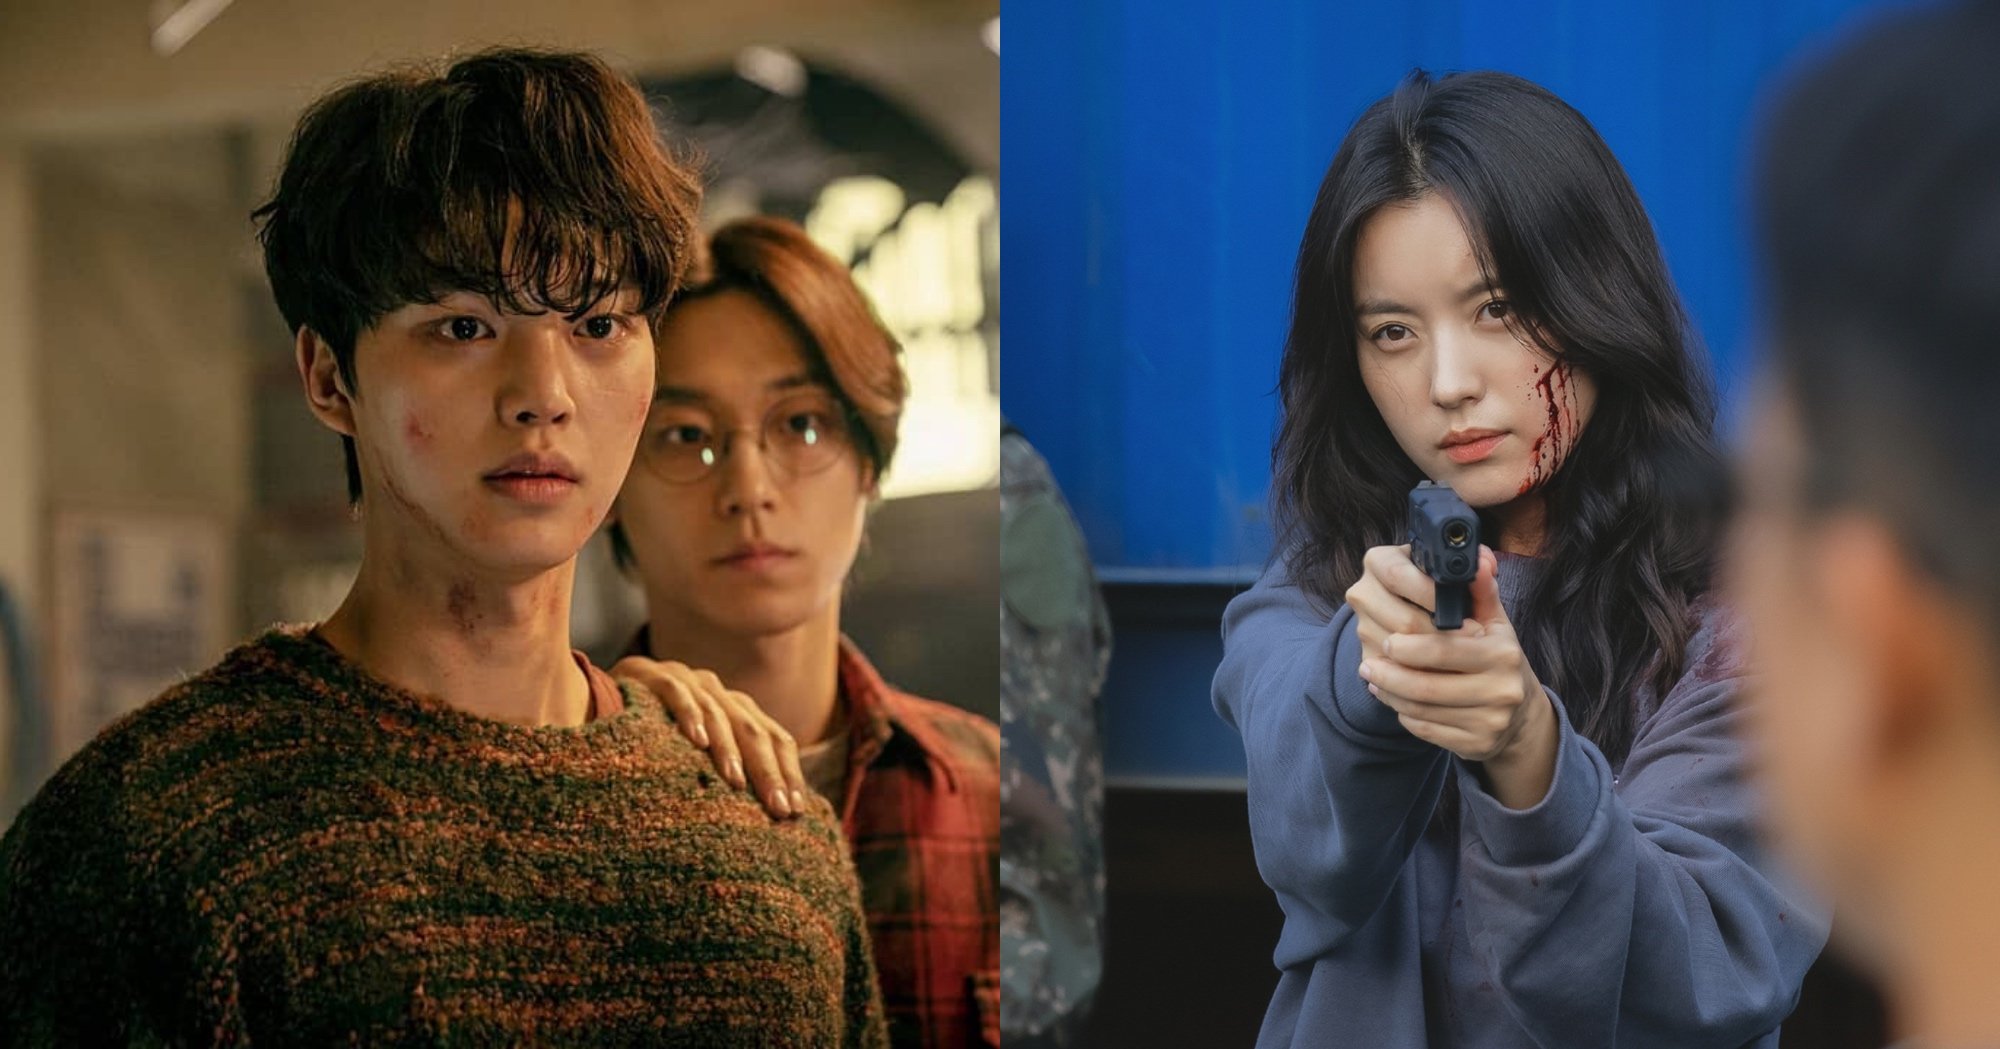 Main characters from 'Sweet Home' on Netflix and 'Happiness' K-drama wearing sweaters.